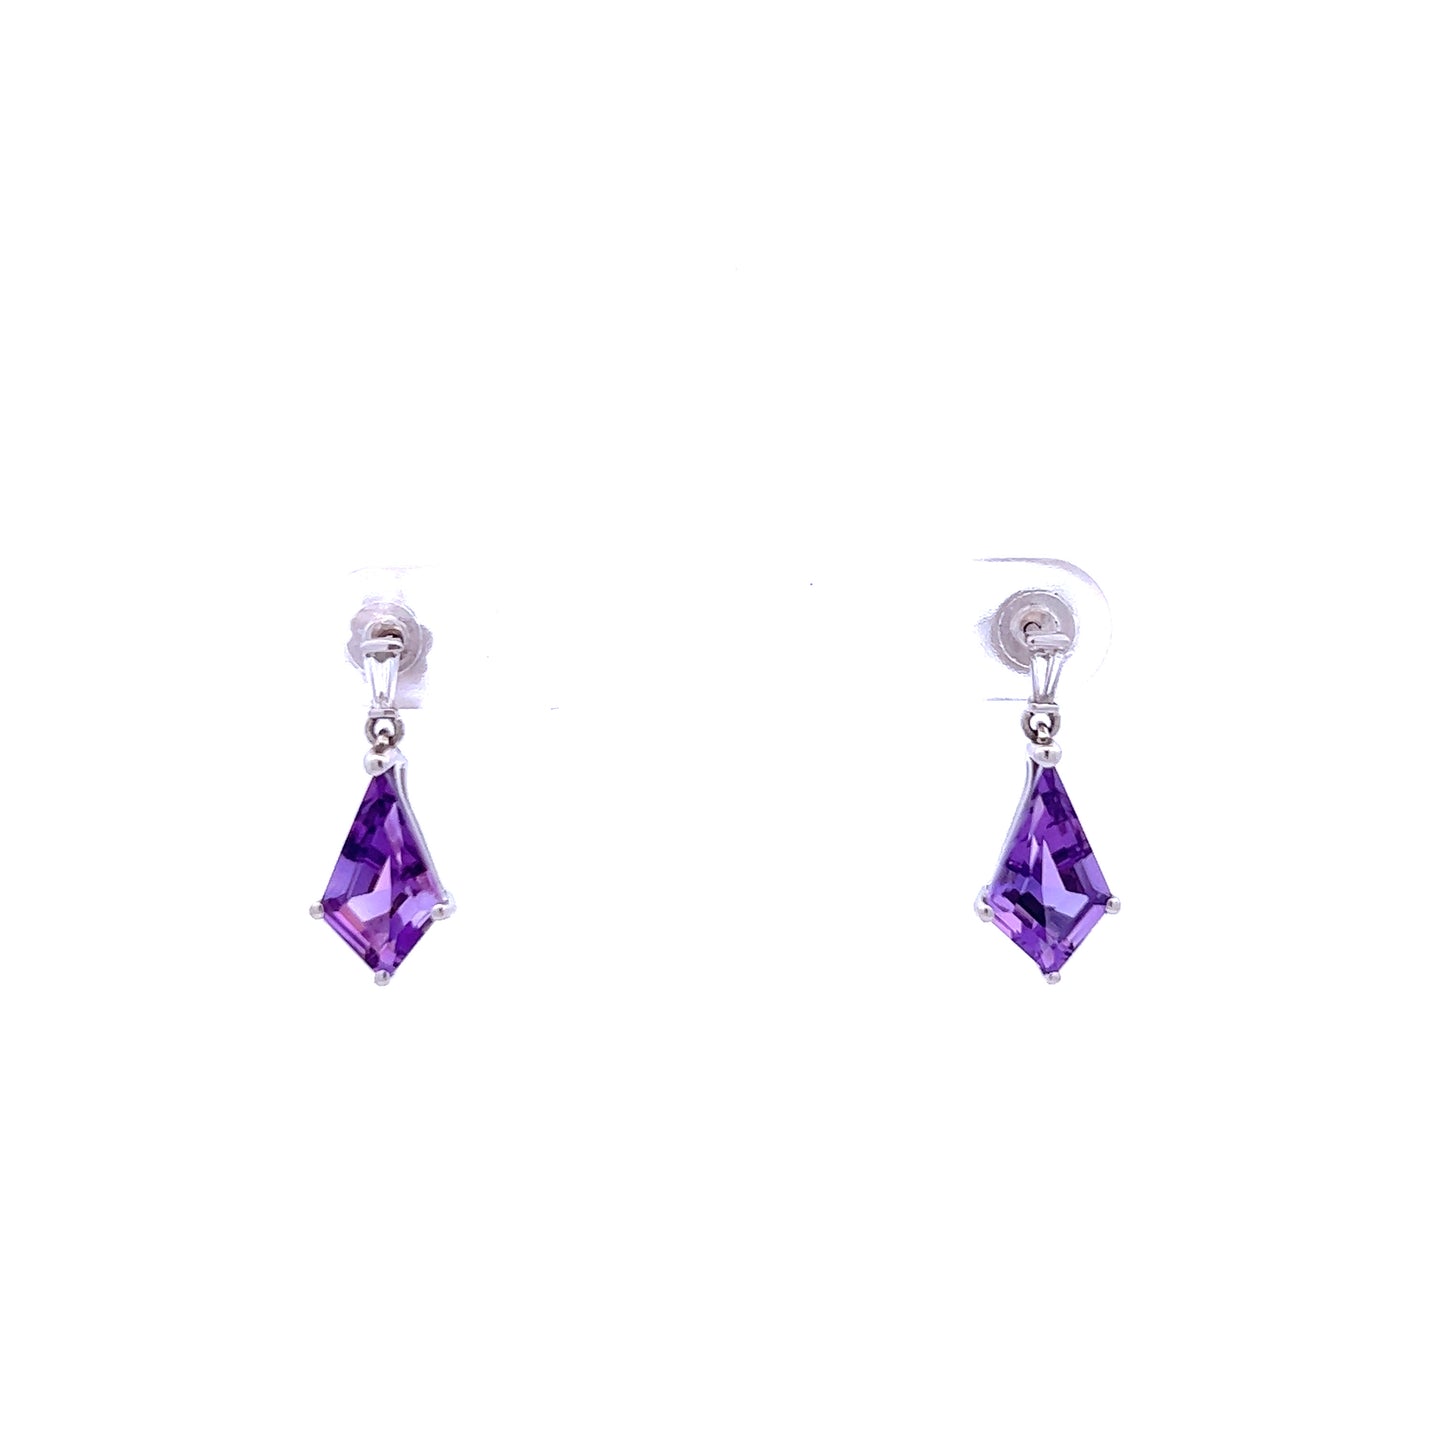 9ct White Gold Amethyst and Diamond Drop Earrings